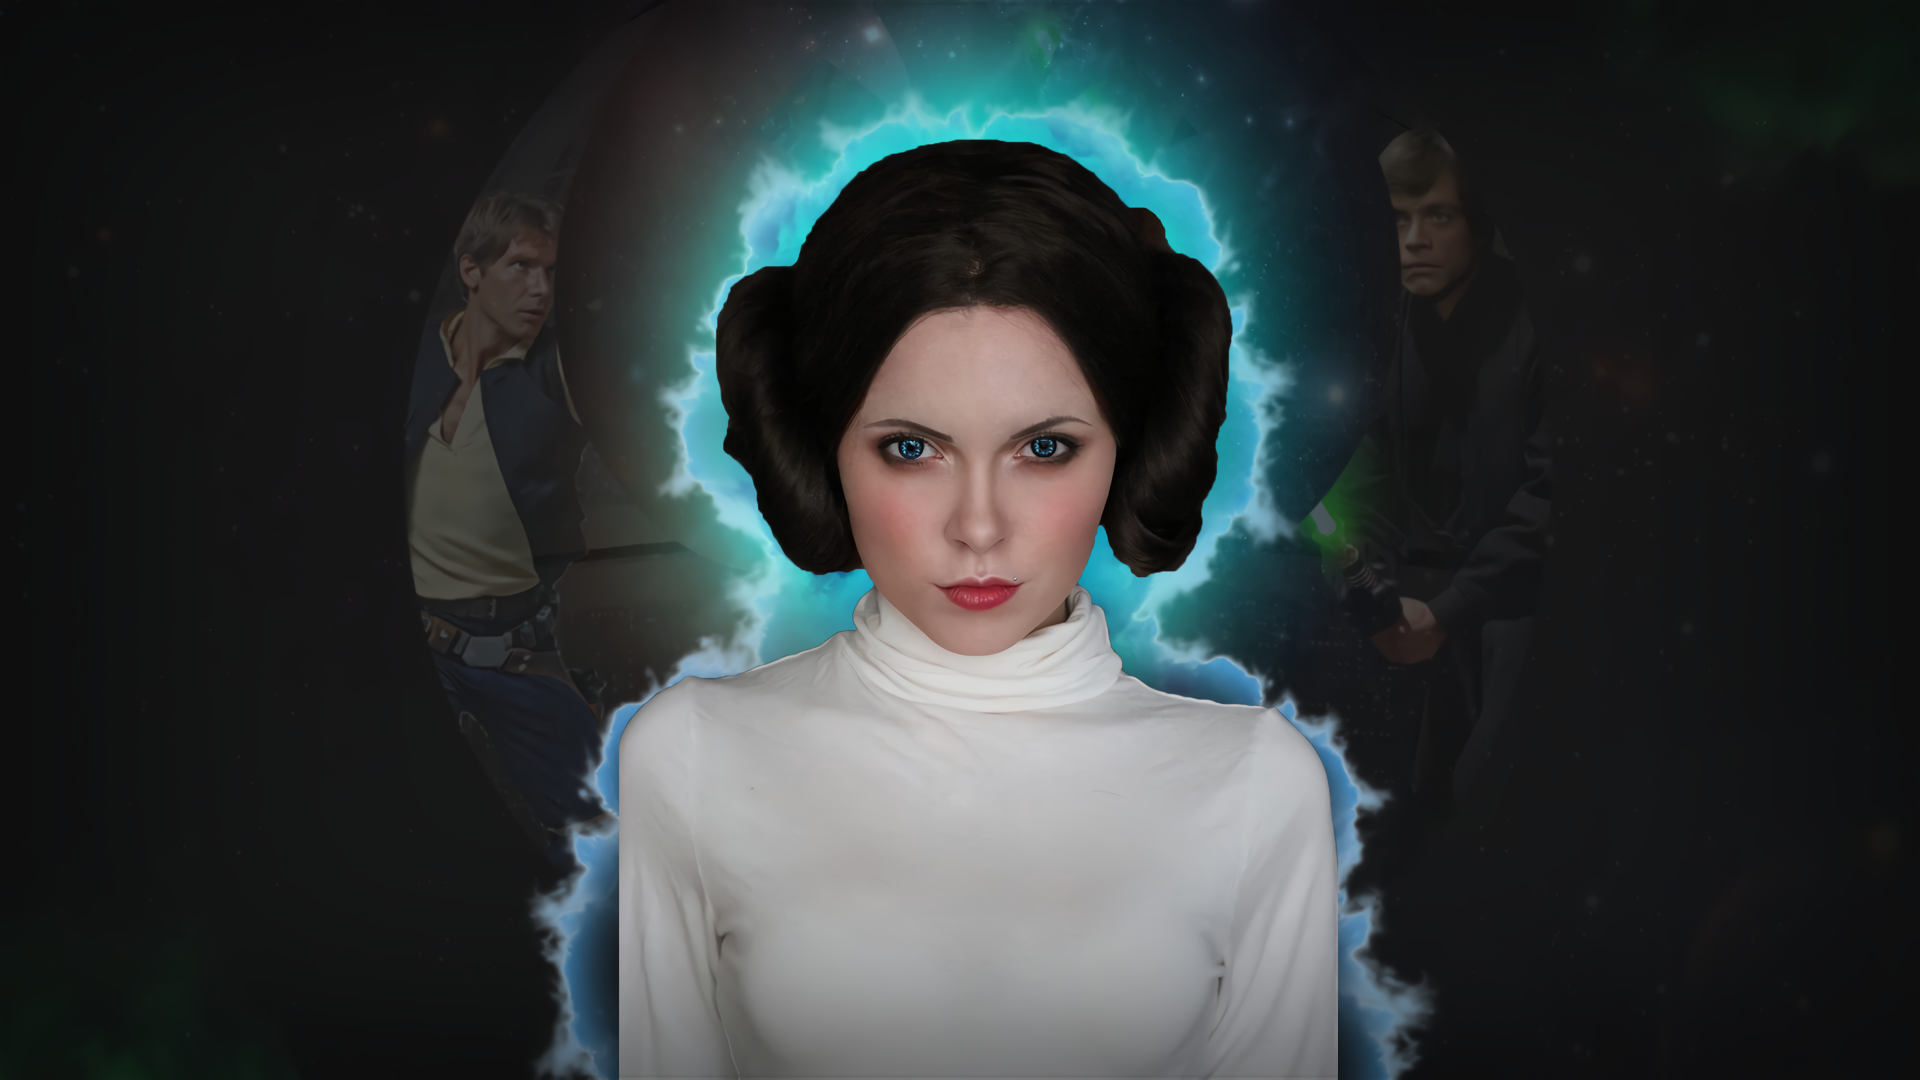 HD Wallpapers for theme: Princess Leia HD wallpapers, backgrounds.